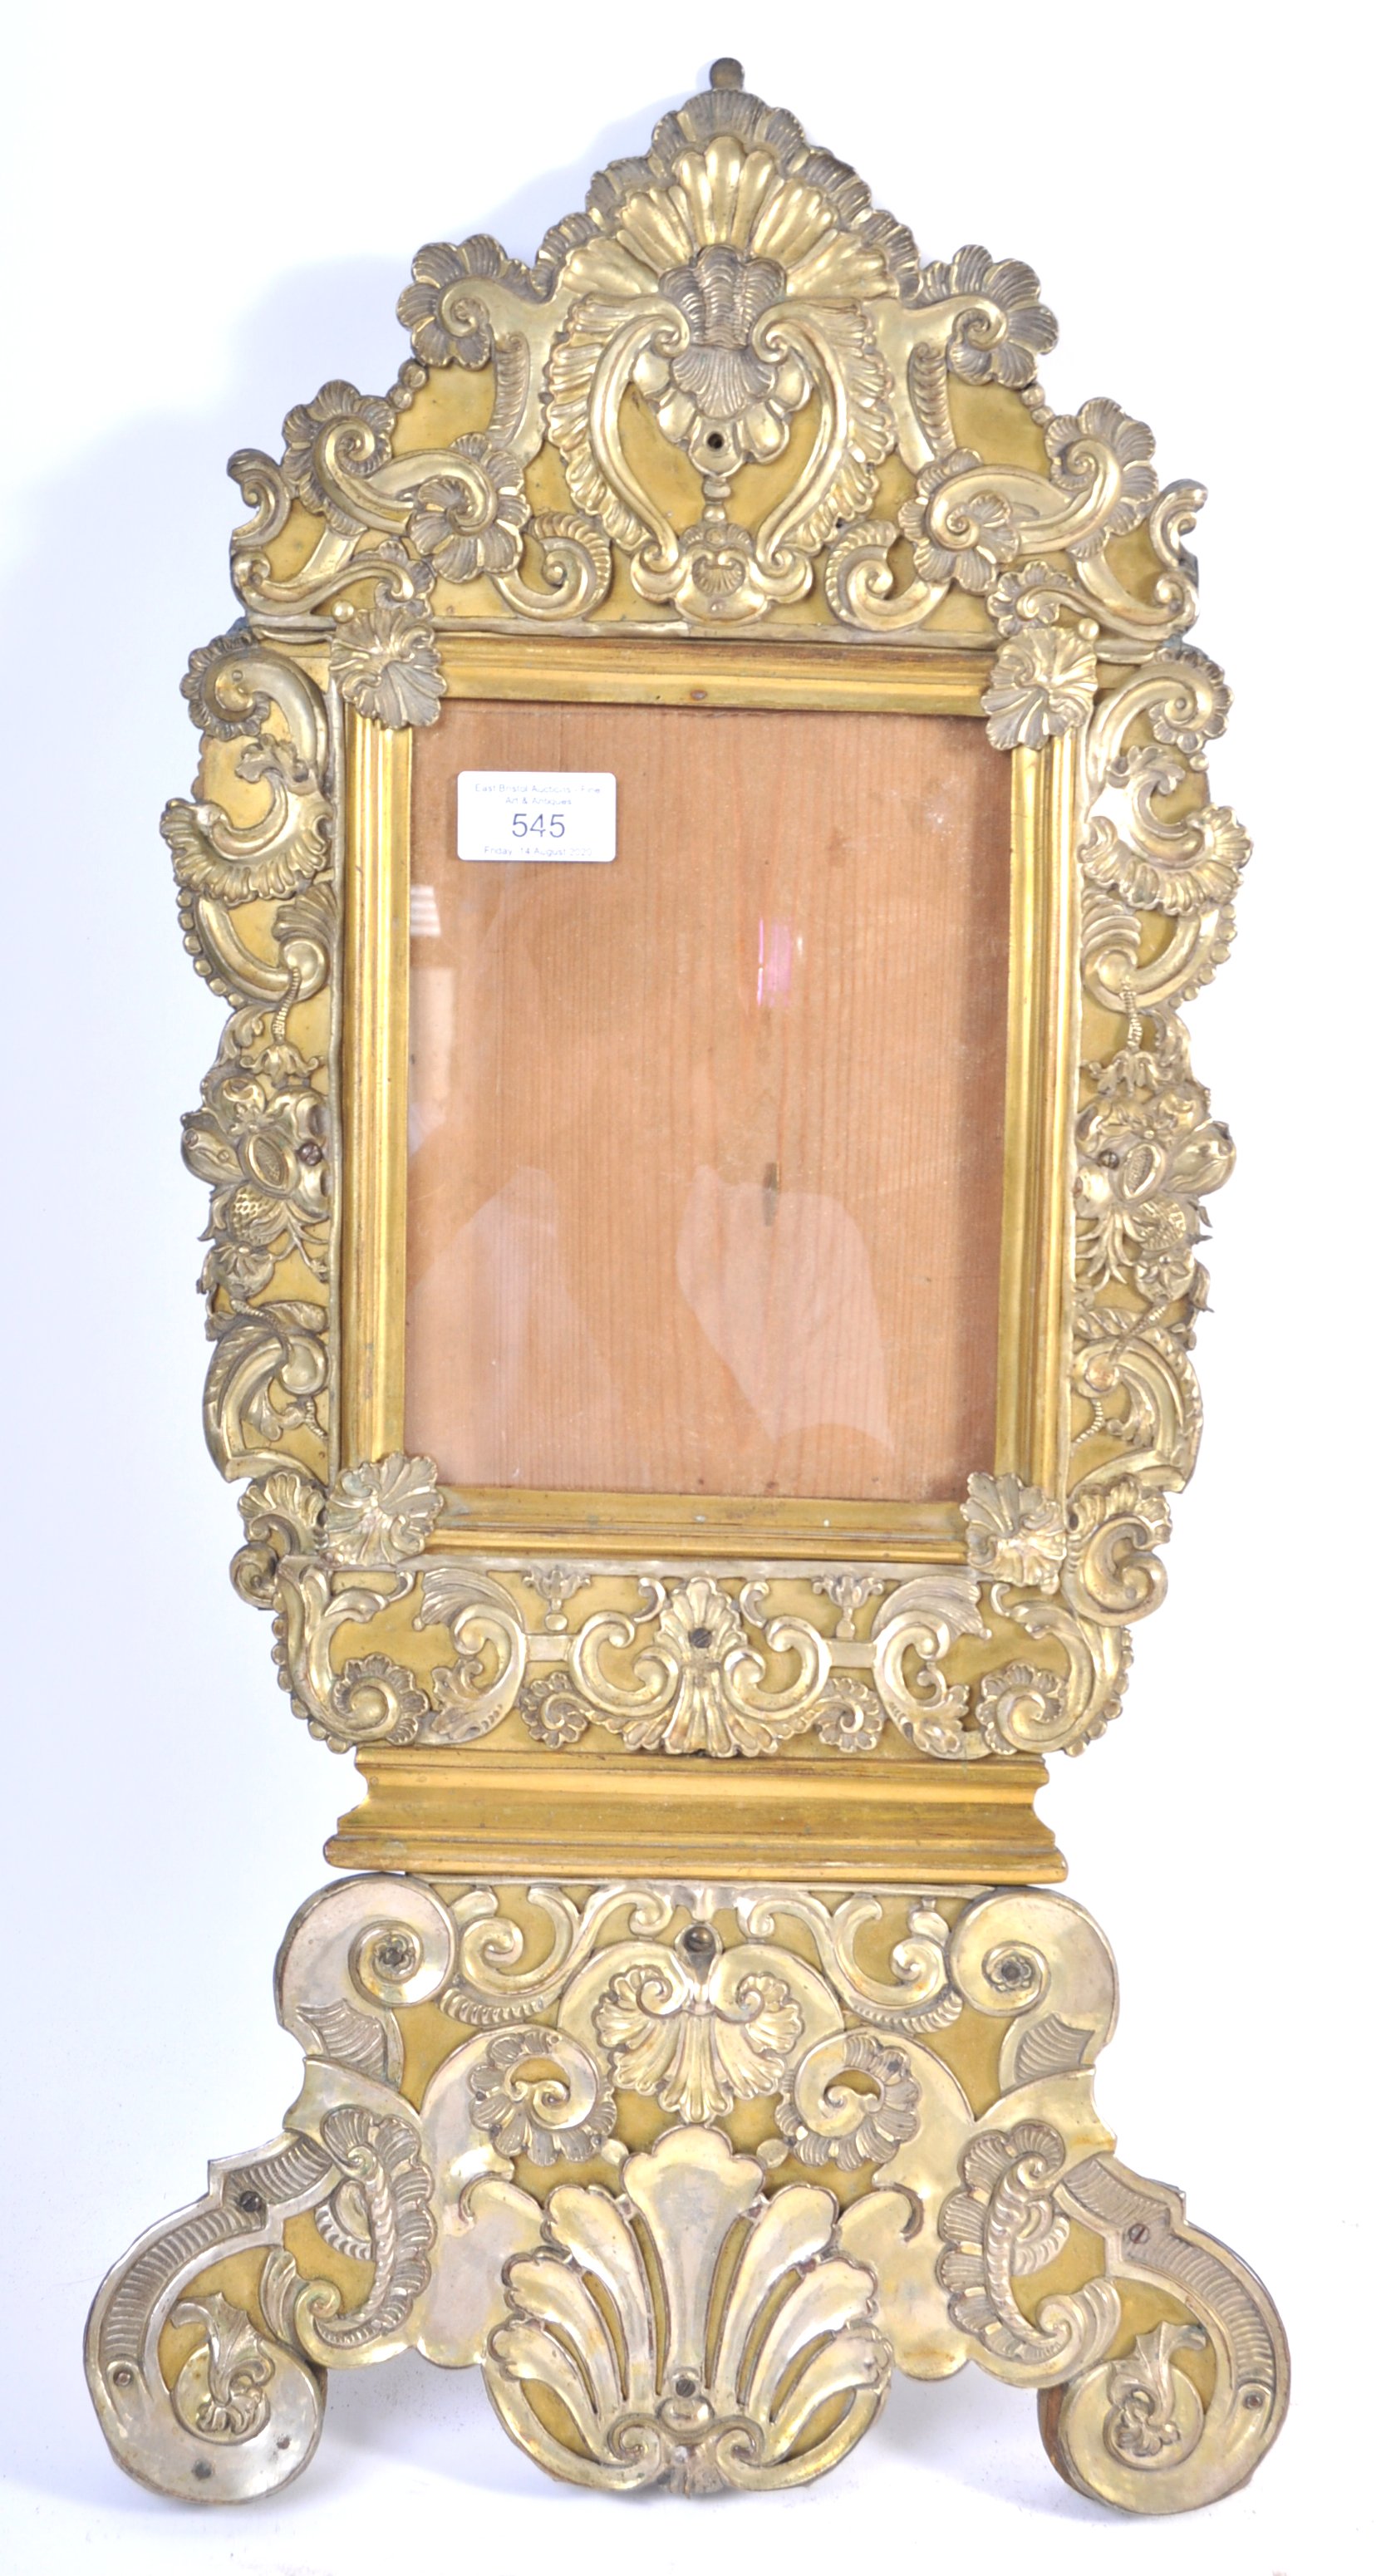 PAIR OF 18TH CENTURY ANTIQUE REPOUSSE BRASS PICTURE FRAMES - Image 3 of 7